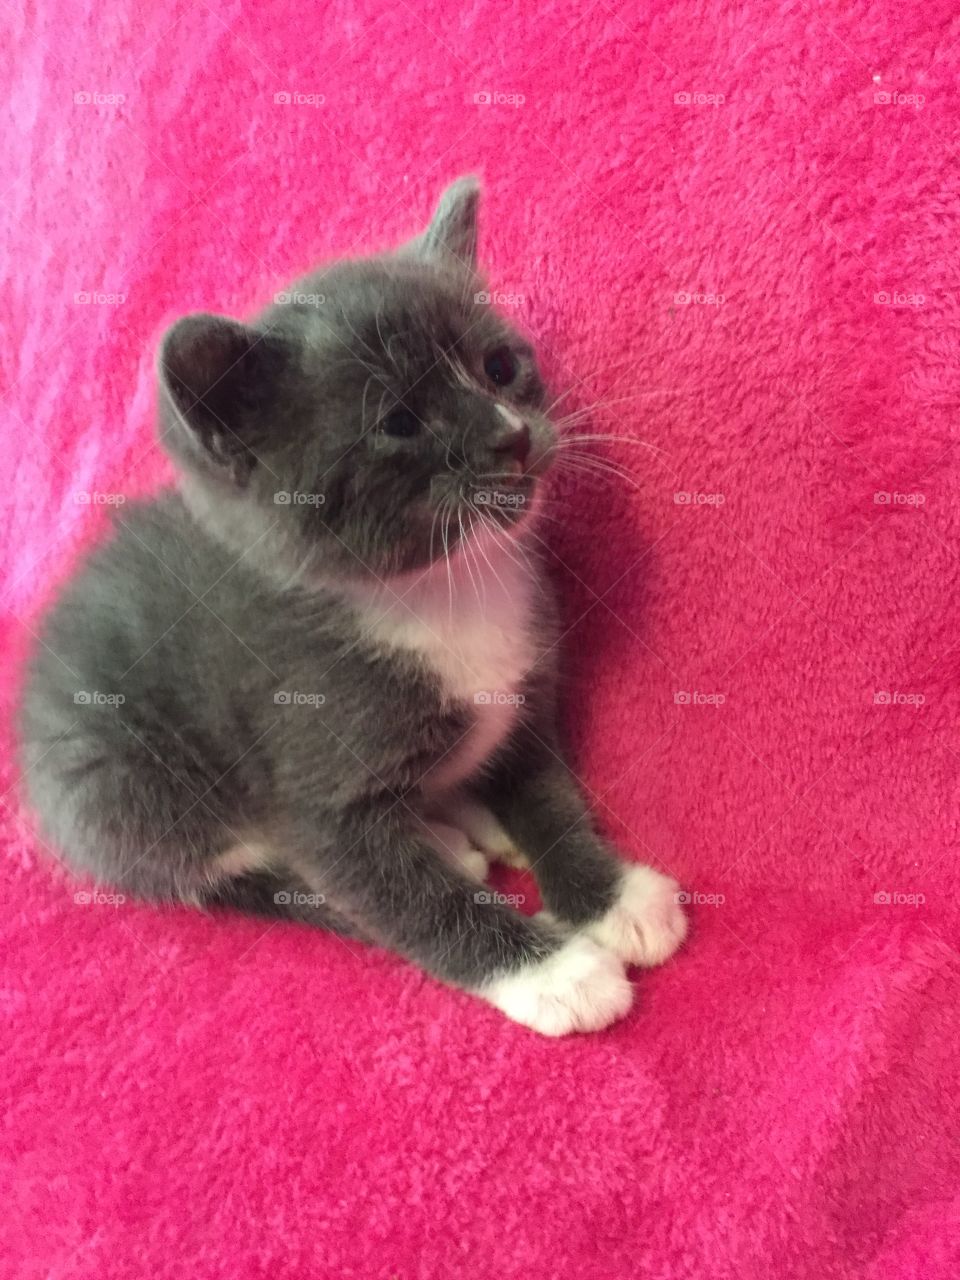 Sweet, playful gray and white kitten playing on a pink blanket. This foster kitten needs a home.